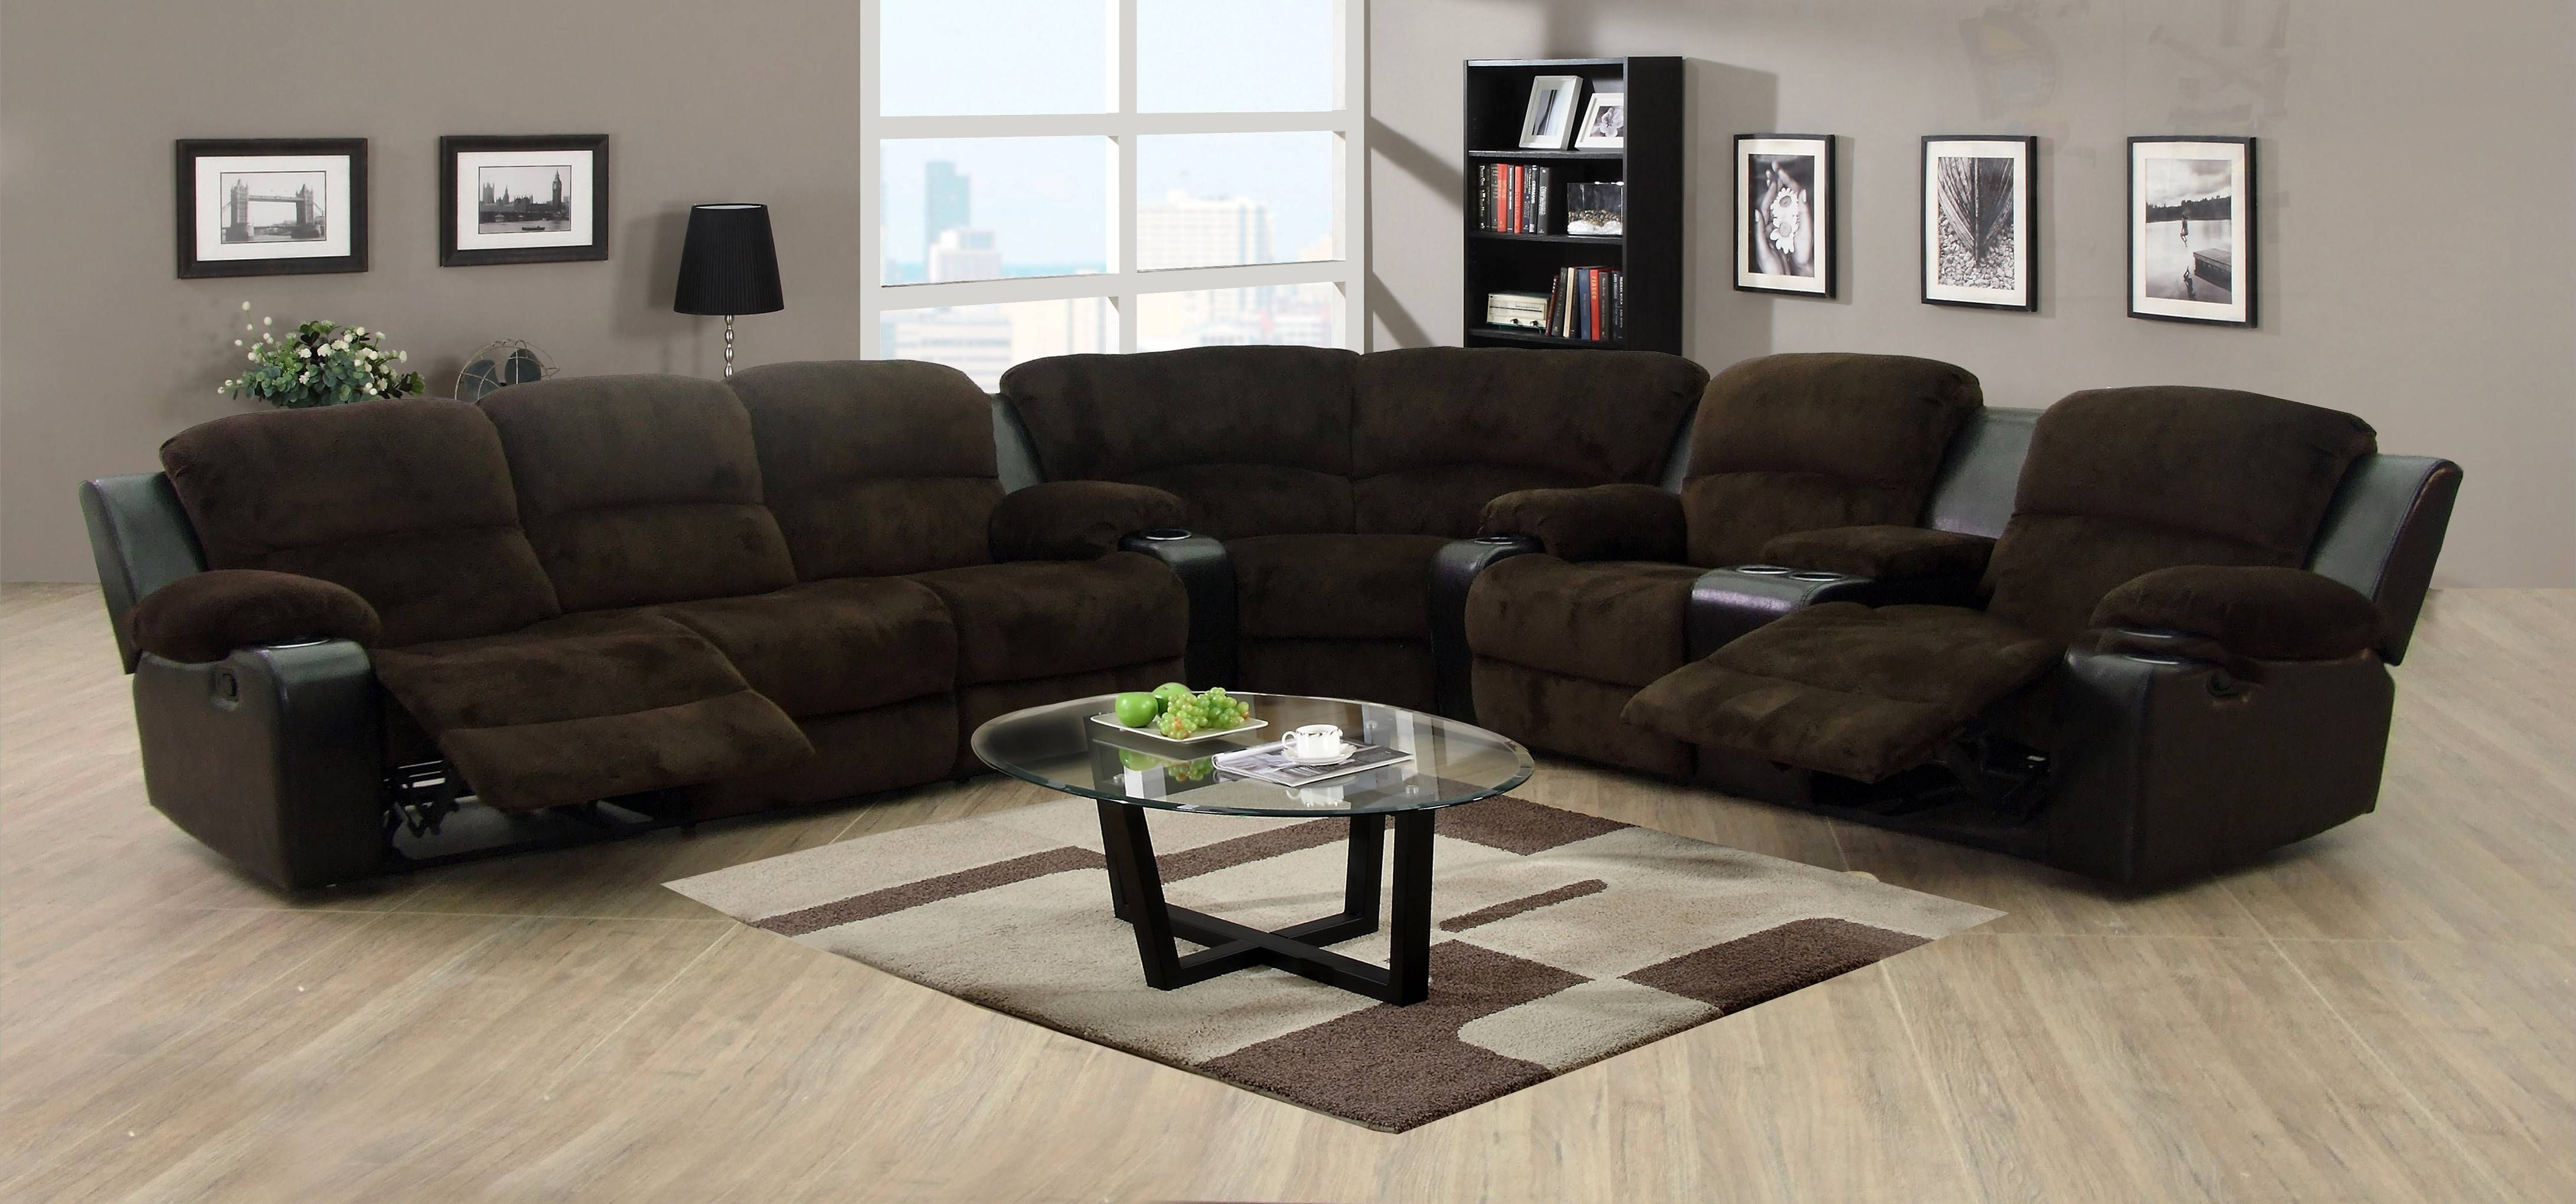 Sectional Recliner Sofa With Cup Holders 31 With Sectional With Sofas With Cup Holders (View 6 of 15)